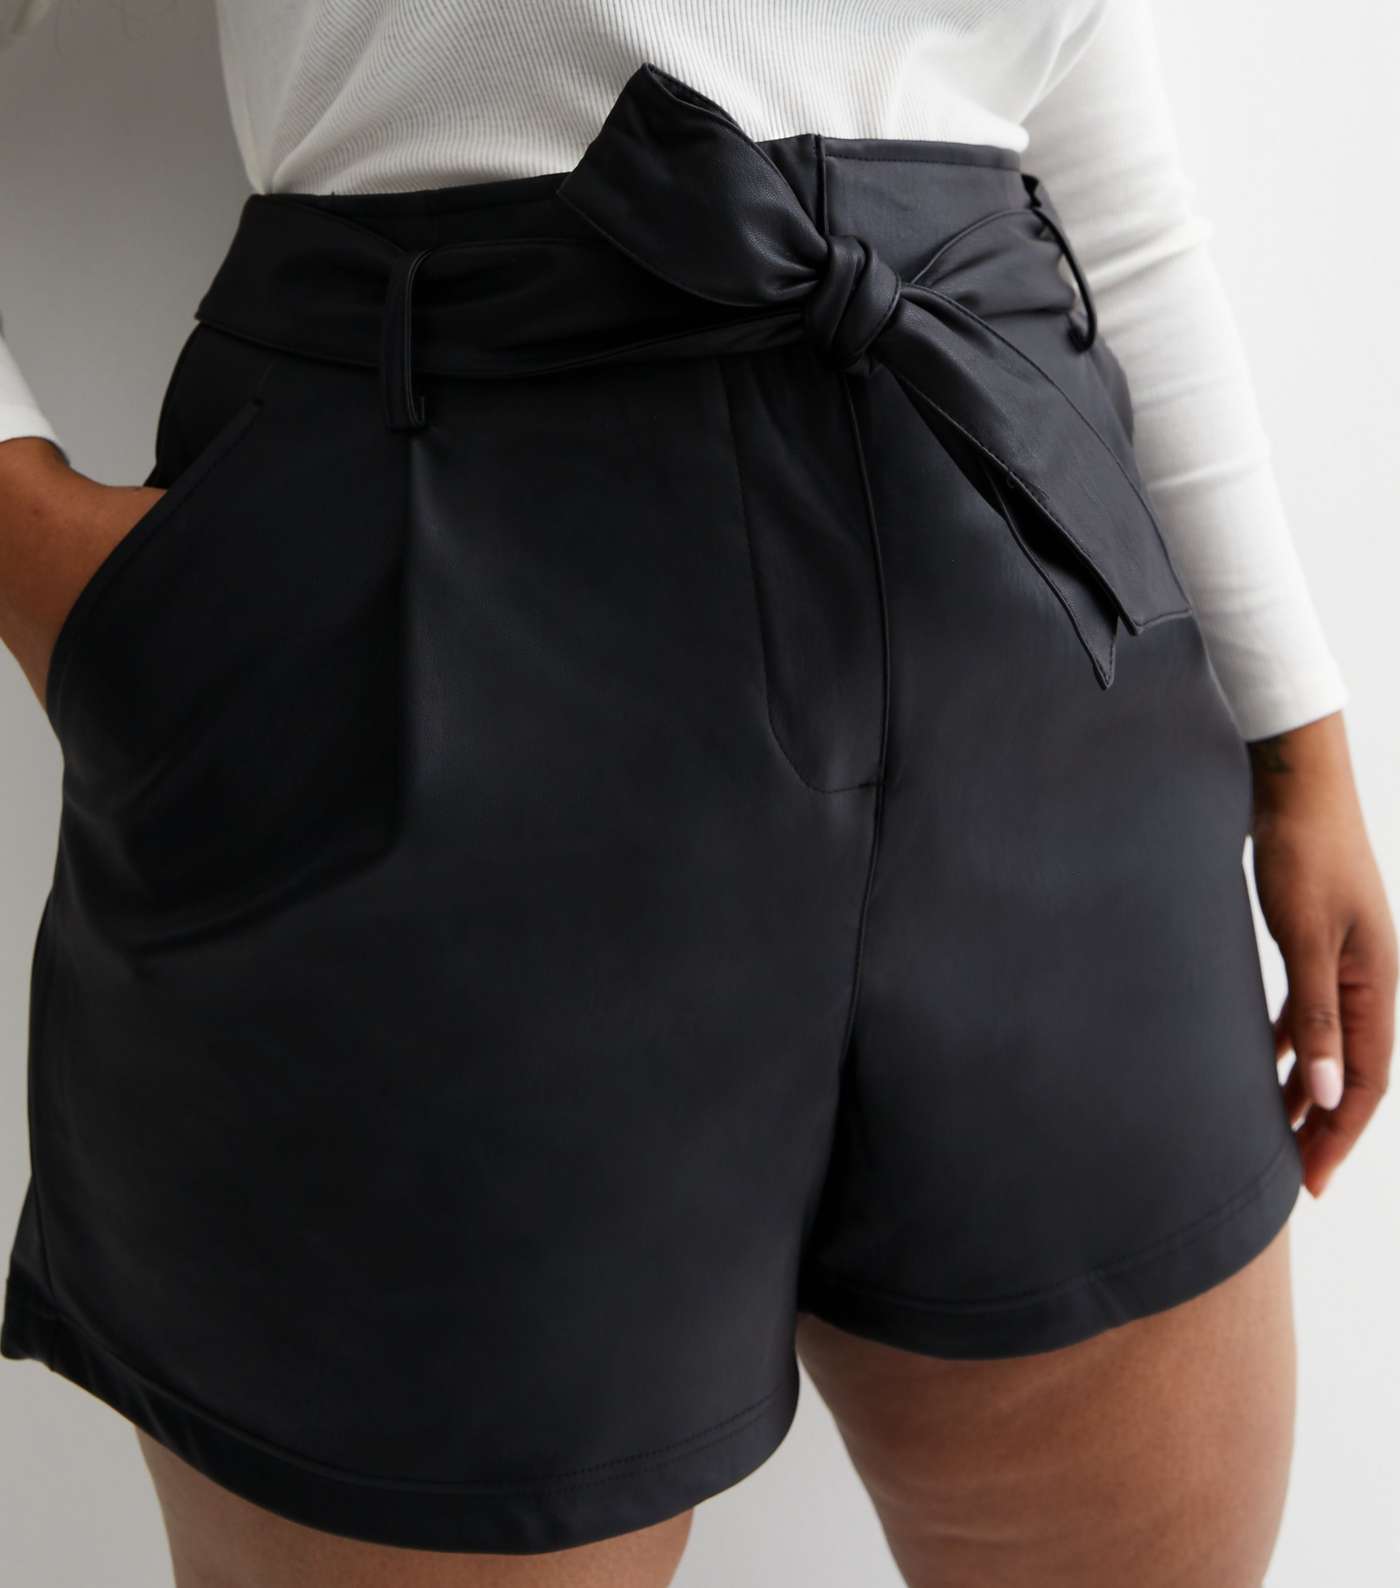 Curves Black Leather-Look Belted Shorts Image 2